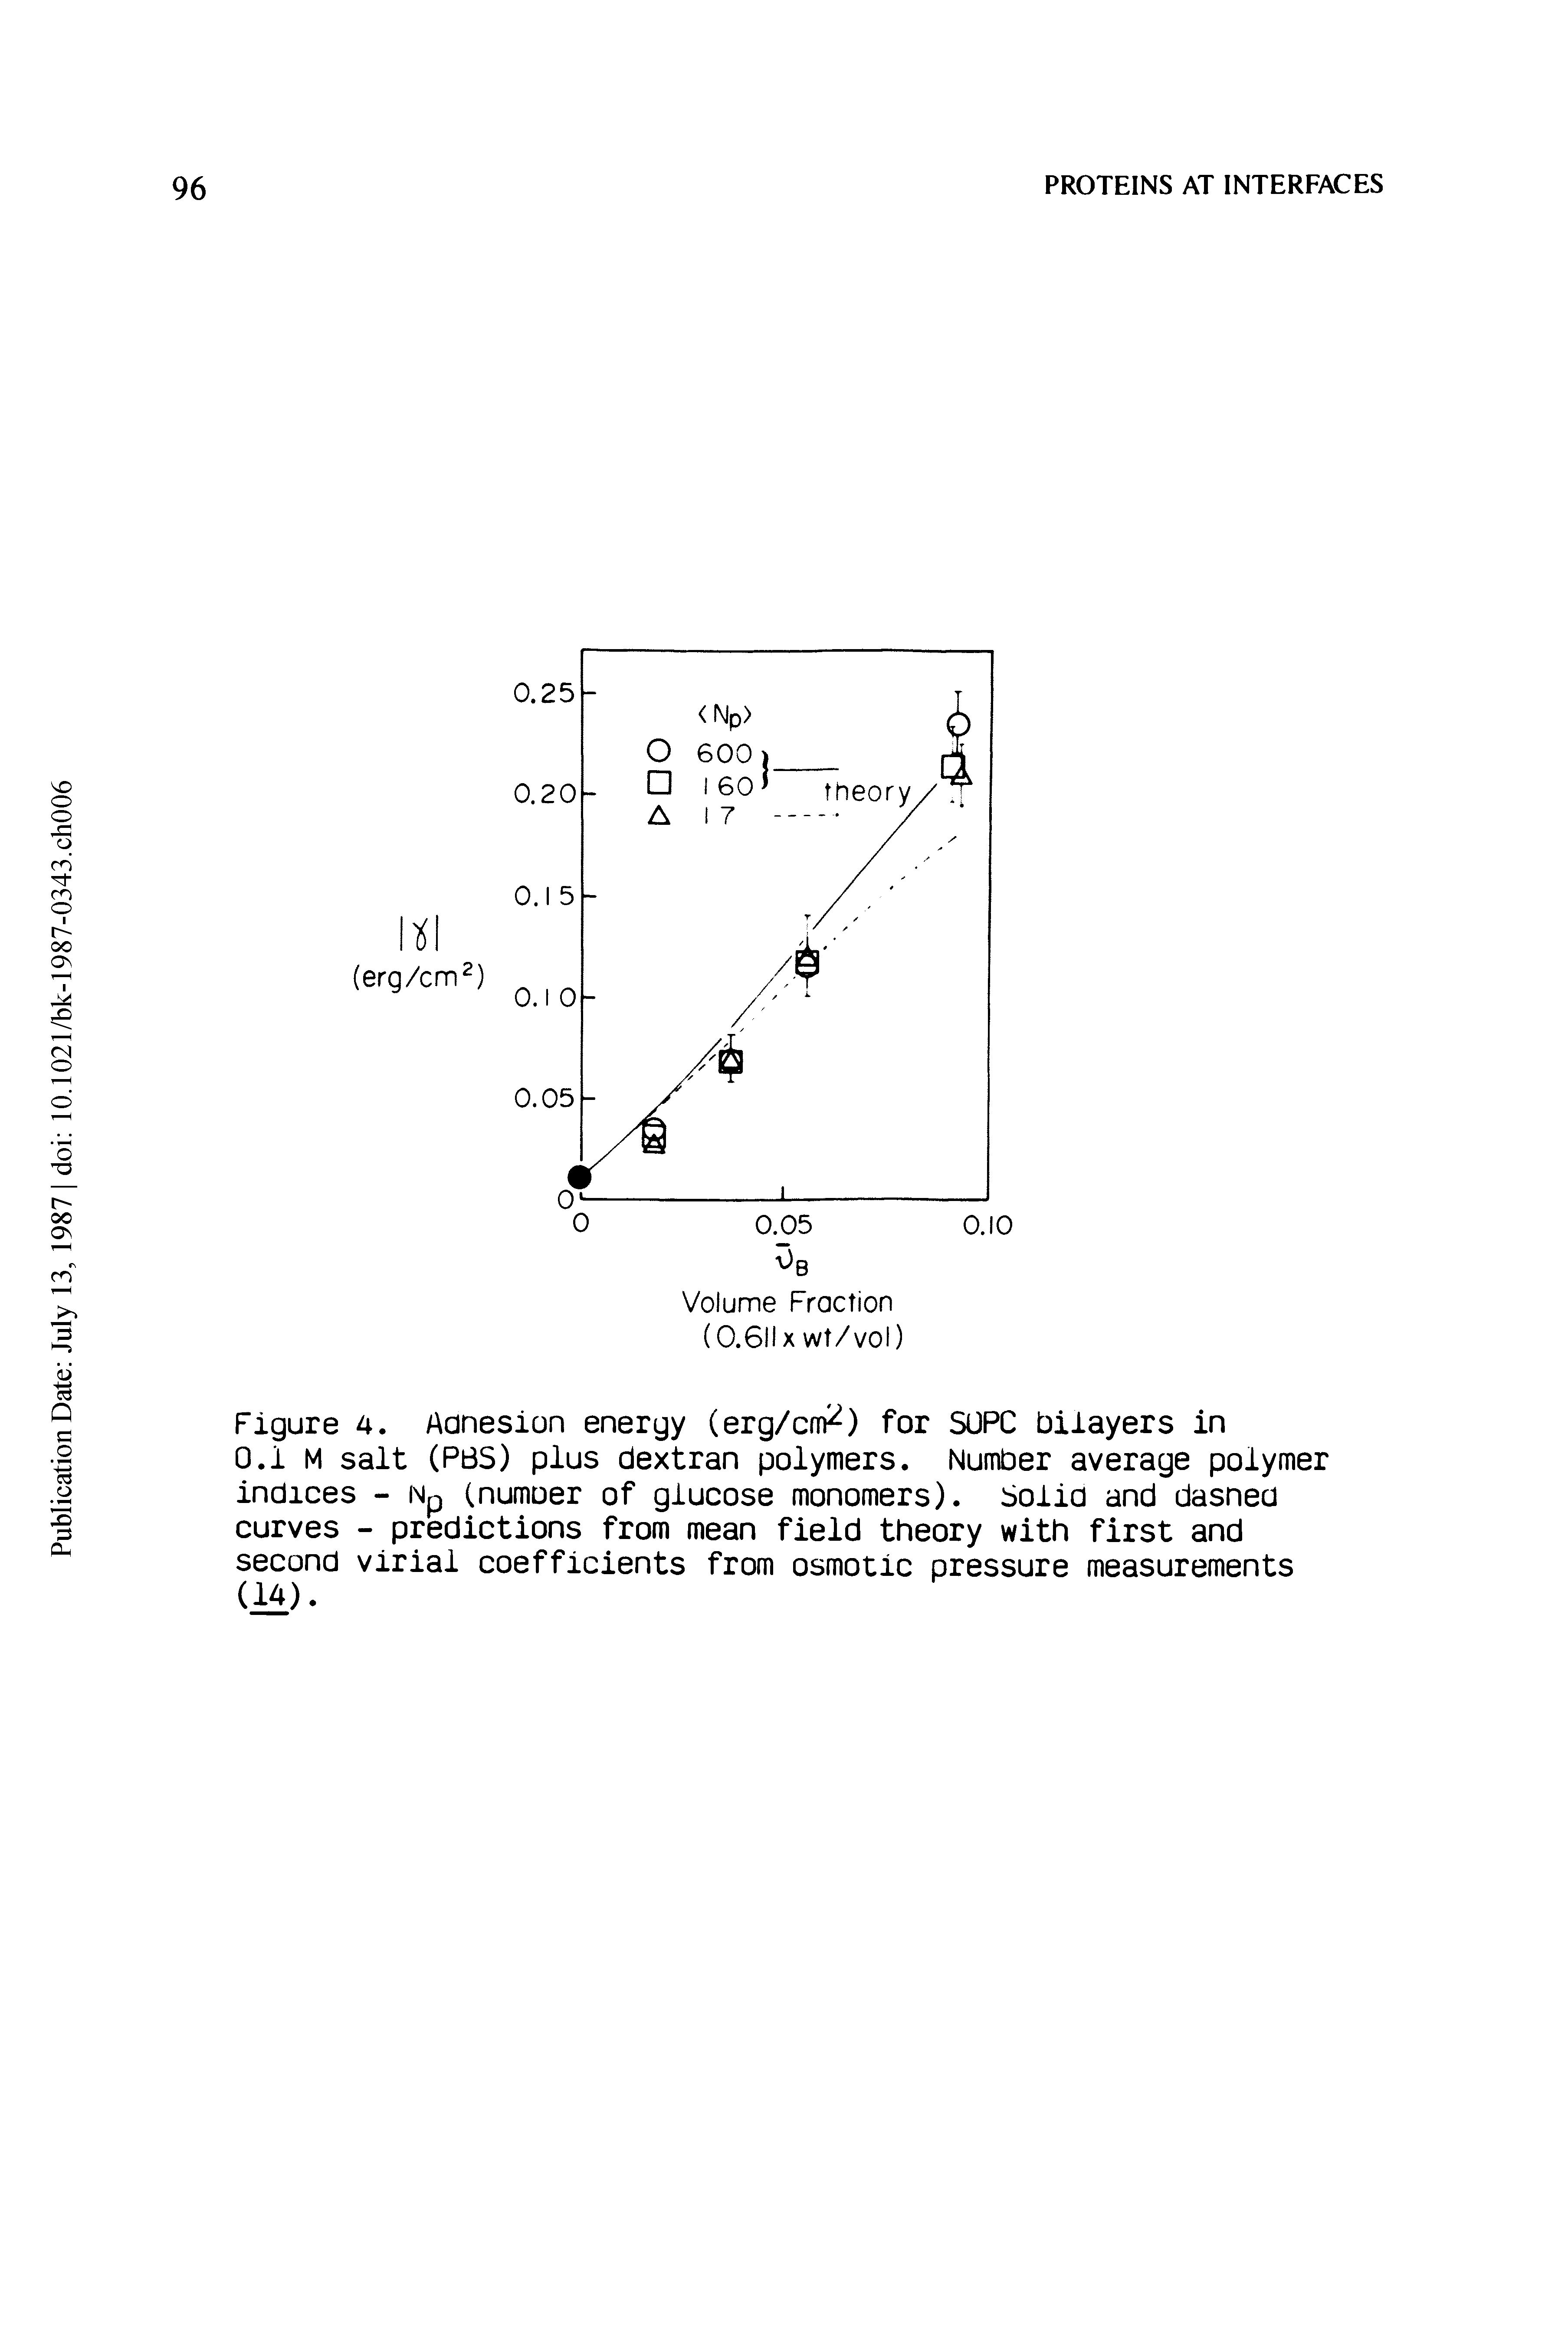 Figure 4. Adnesion energy (erg/cm ) for SUPC biiayers in 0.1 M salt (PBS) plus dextran polymers. Number average polymer indices - Np (number of glucose monomers). Solid and dasned curves - predictions from mean field theory with first and second virial coefficients from osmotic pressure measurements (14).